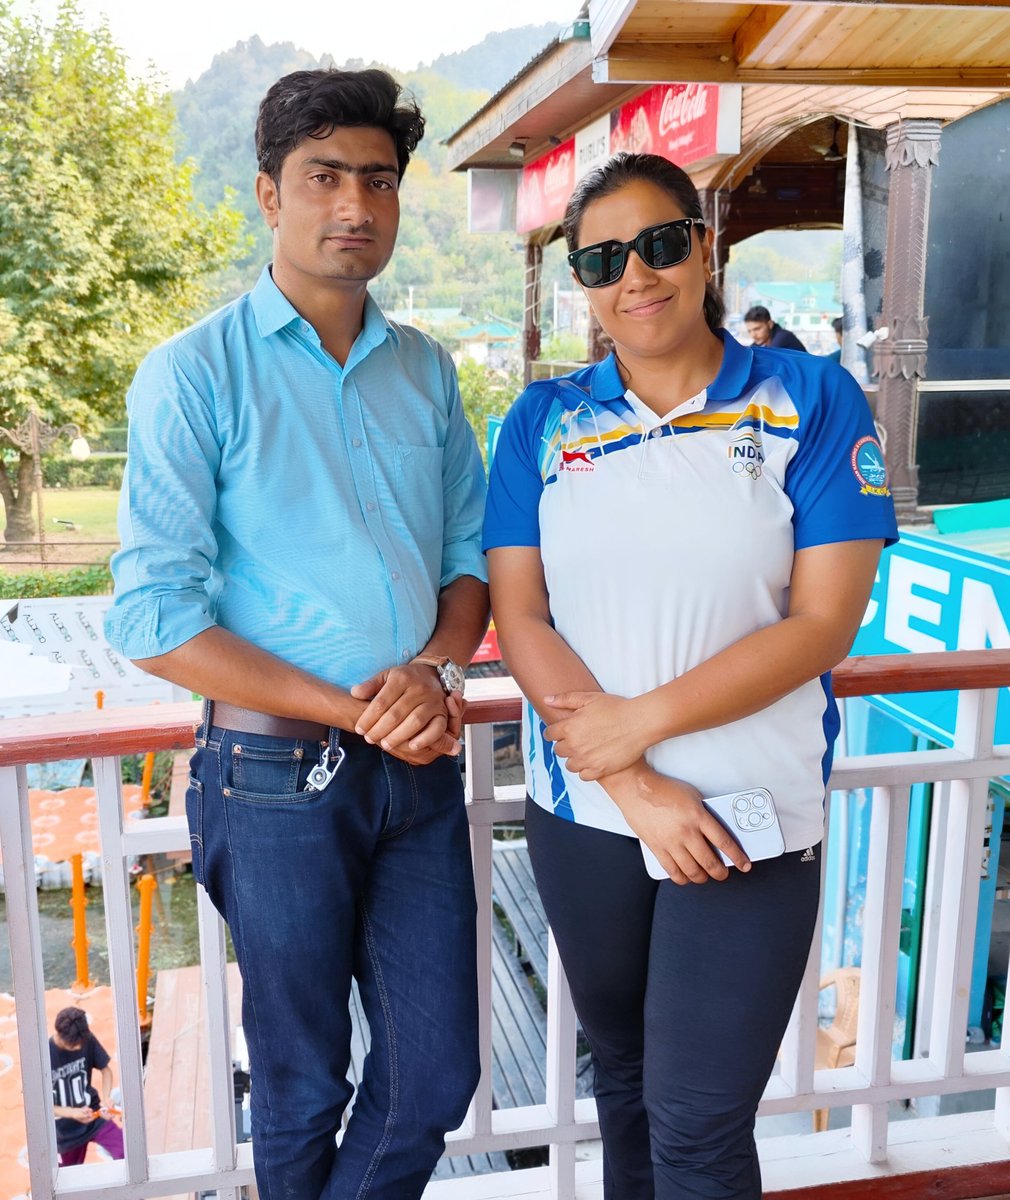 Bilquis Mir makes history!
The first Indian woman athlete appointed as a jury member for the upcoming 19th Asian Games. Her journey from Srinagar to the Asian Games is an inspiration to all. Let's cheer for her and wish her the best! 🚣‍♀️🏅 #BilquisMir #AsianGames #Kashmir